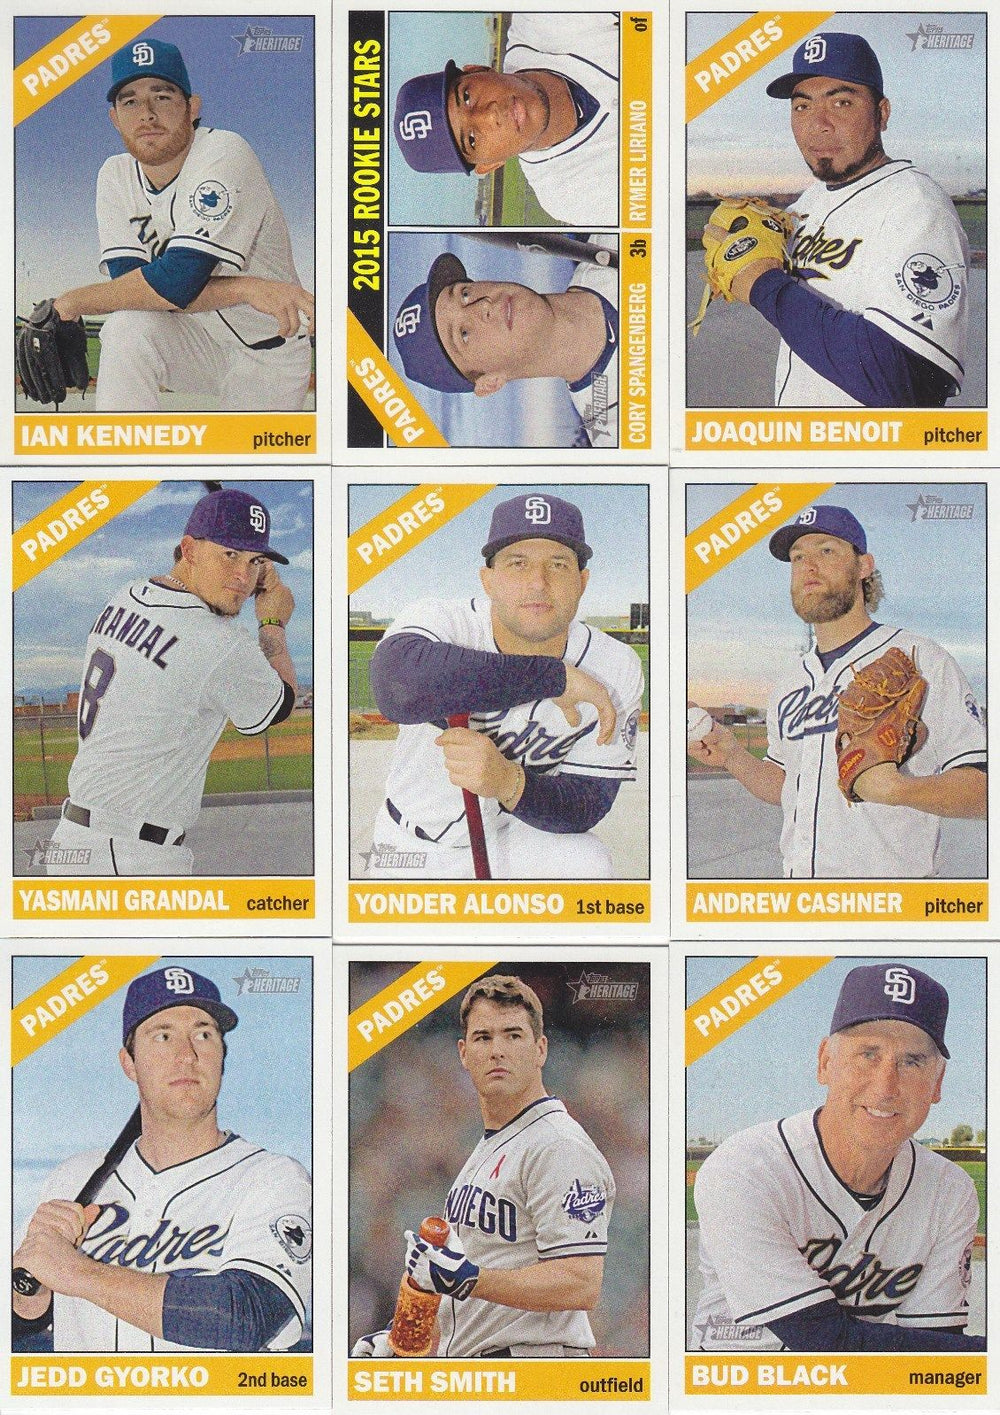 San Diego Padres 2015 Topps HERITAGE Team Set with Cory Spangenberg Rookie Card Plus